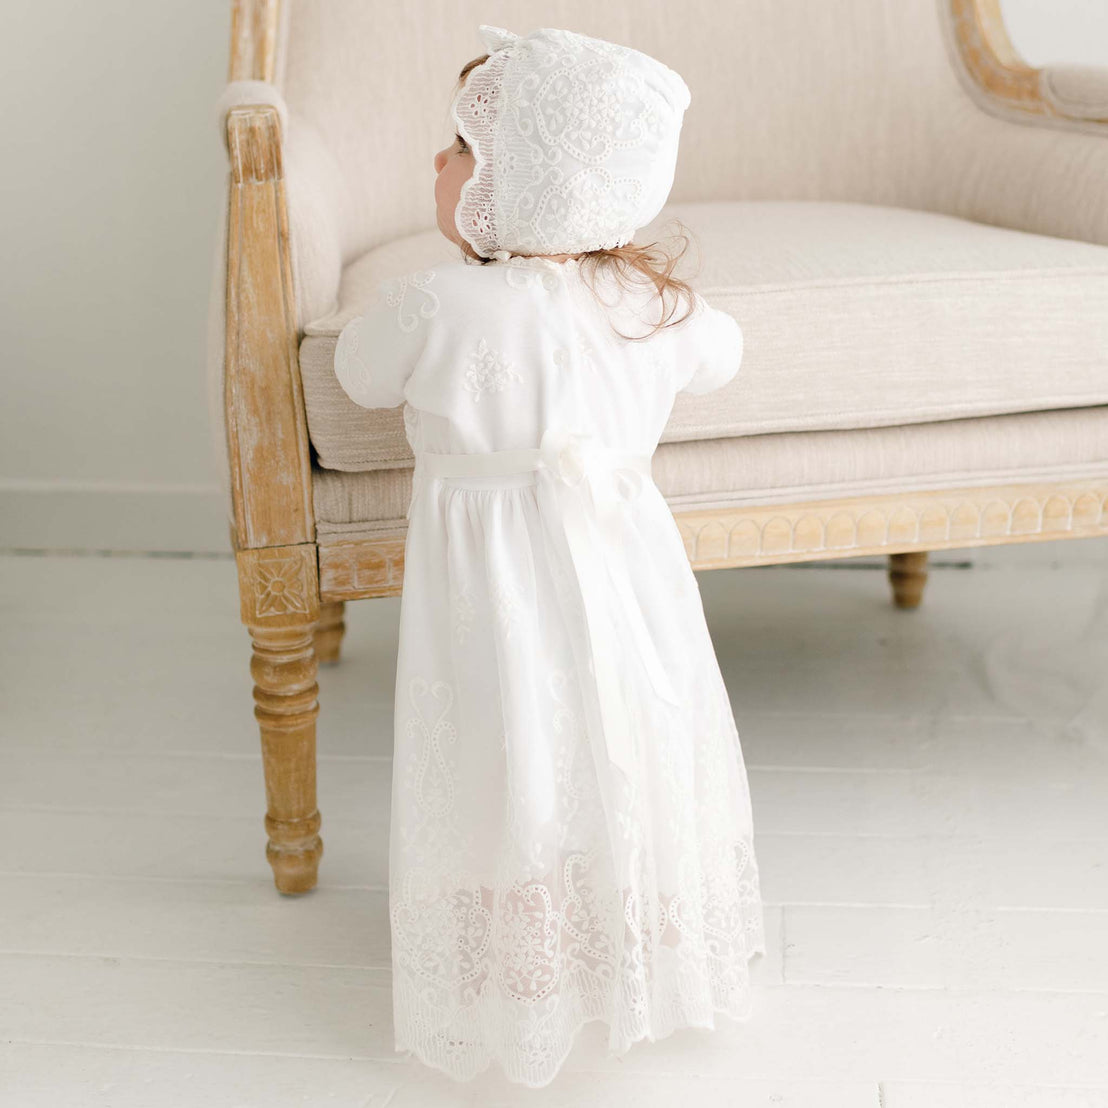 A toddler in the Eliza Lace Dress & Headband stands by an elegant antique chair, facing away from the camera. The setting is a bright room with soft-colored decor.